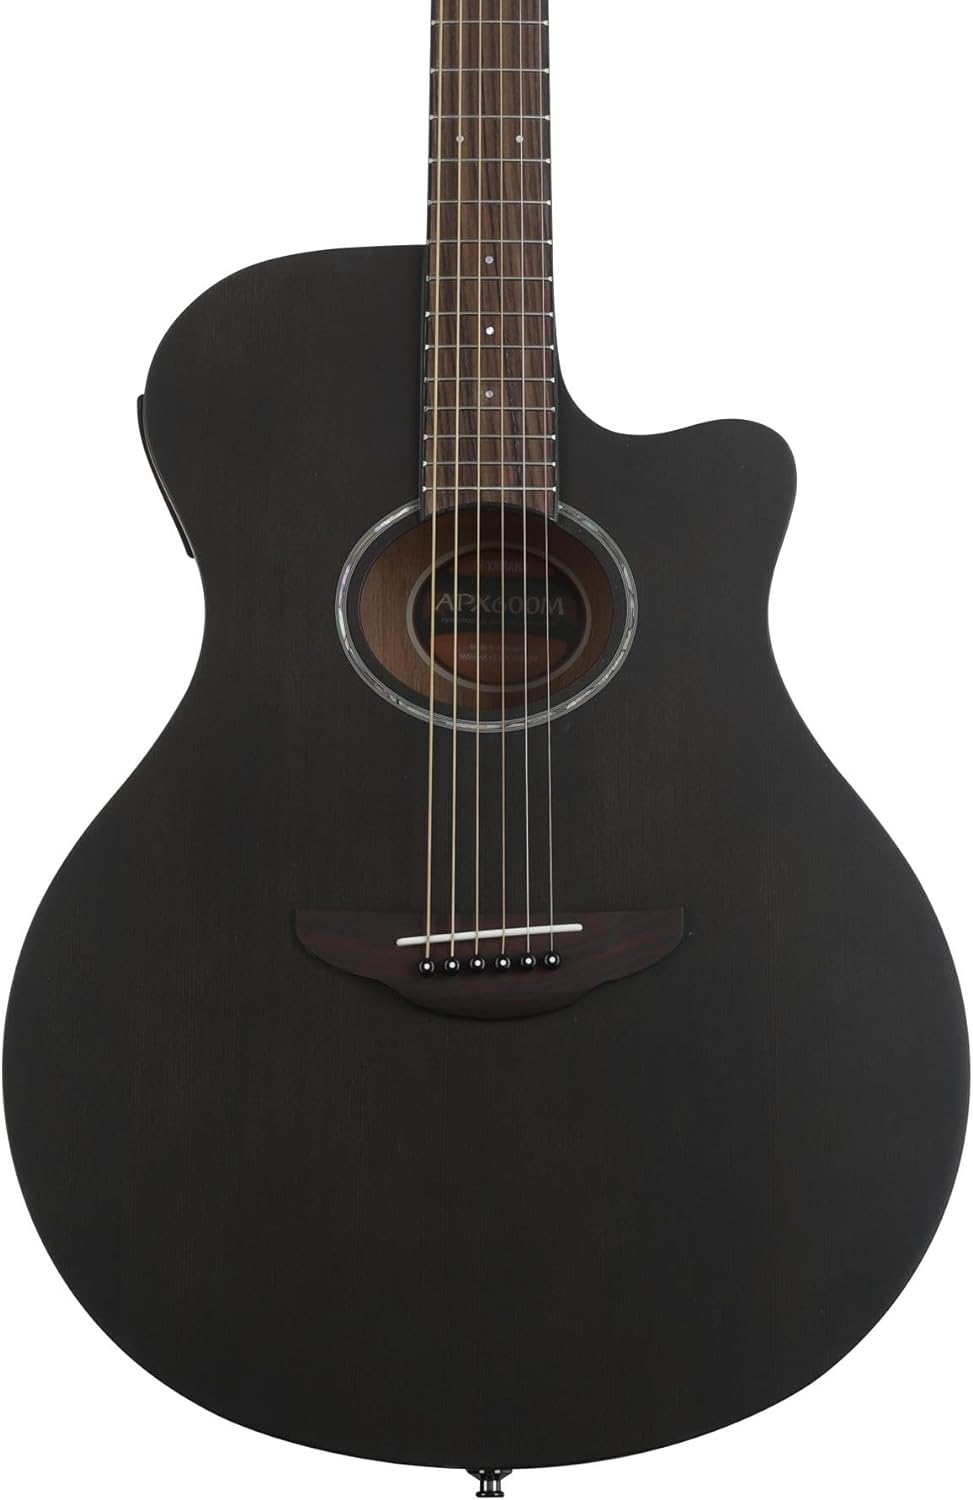 Yamaha 6 String Acoustic-Electric Guitar, Right, Smoky Black Matte (APX600M SMB)